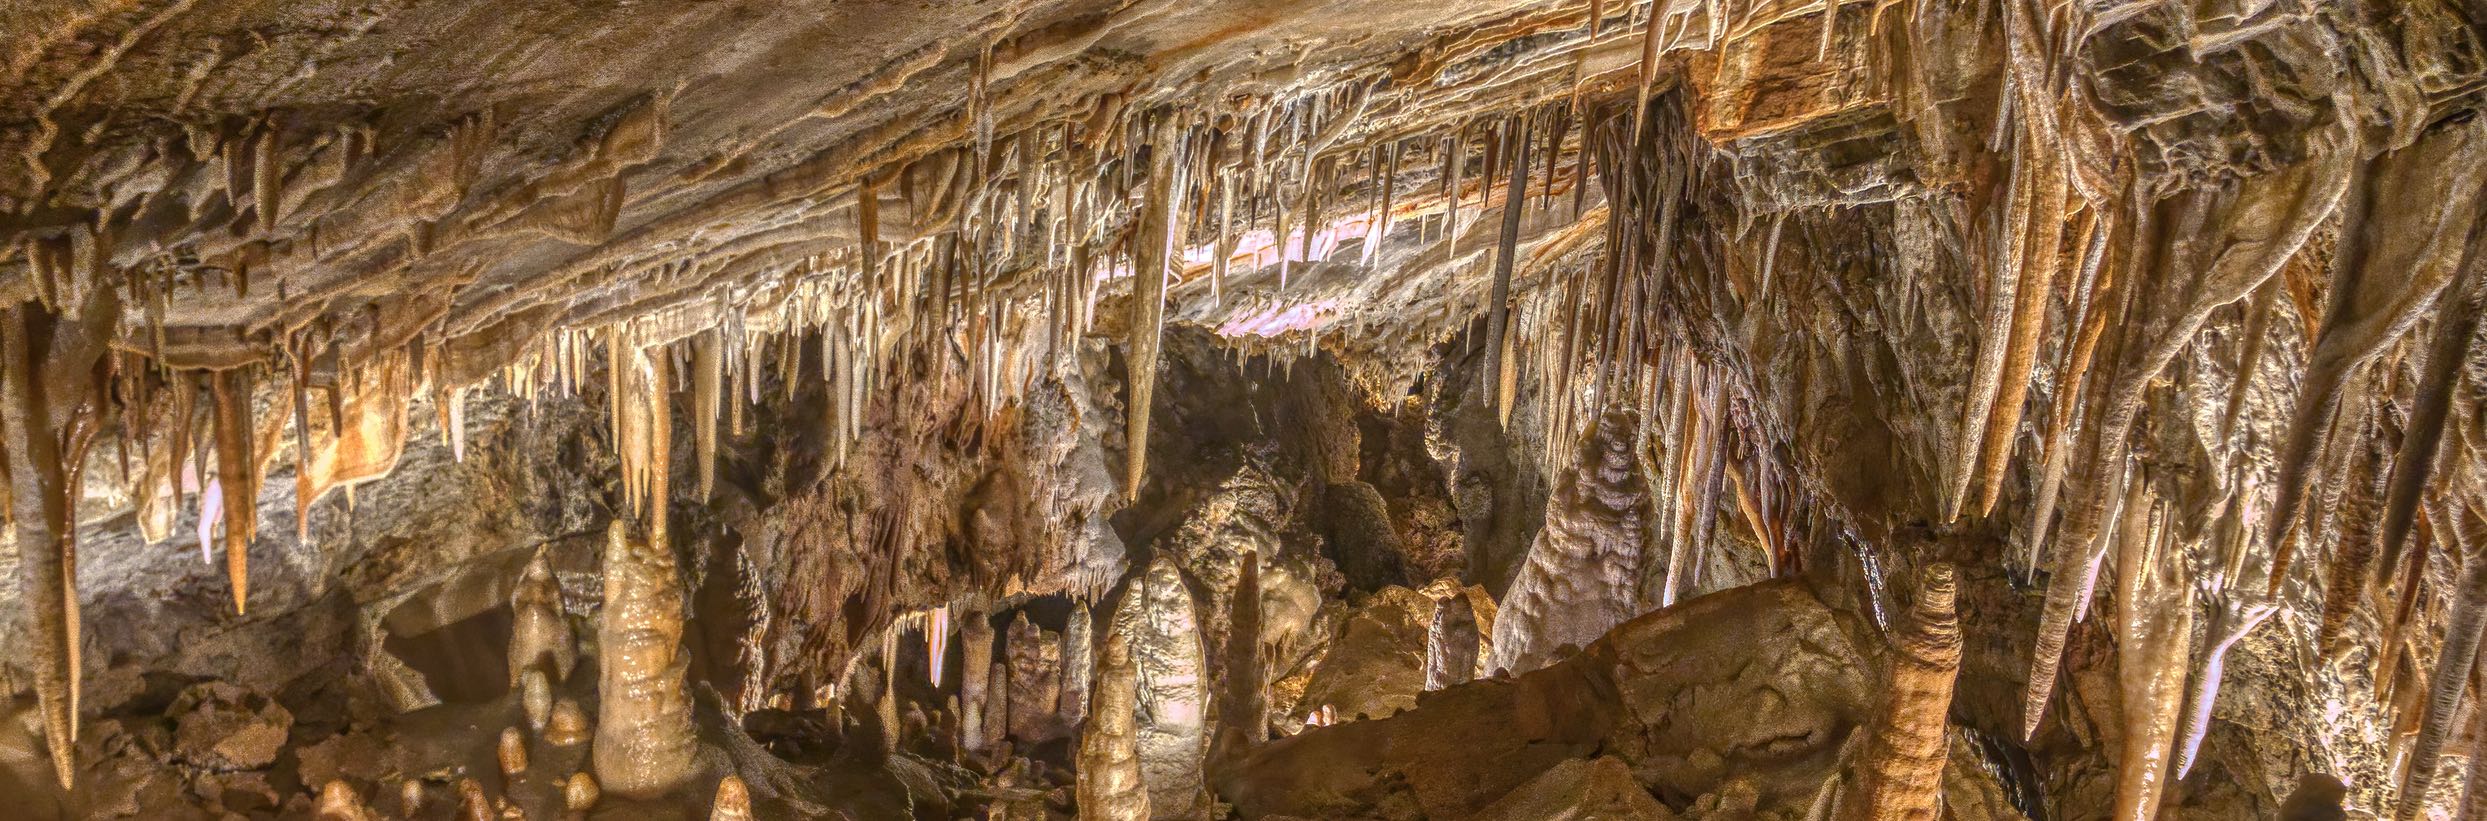 An inside view of the Glenwood Caverns Adventure caves, where the light delicately illuminates the stalagmites, revealing the intricate beauty of the underground formations.